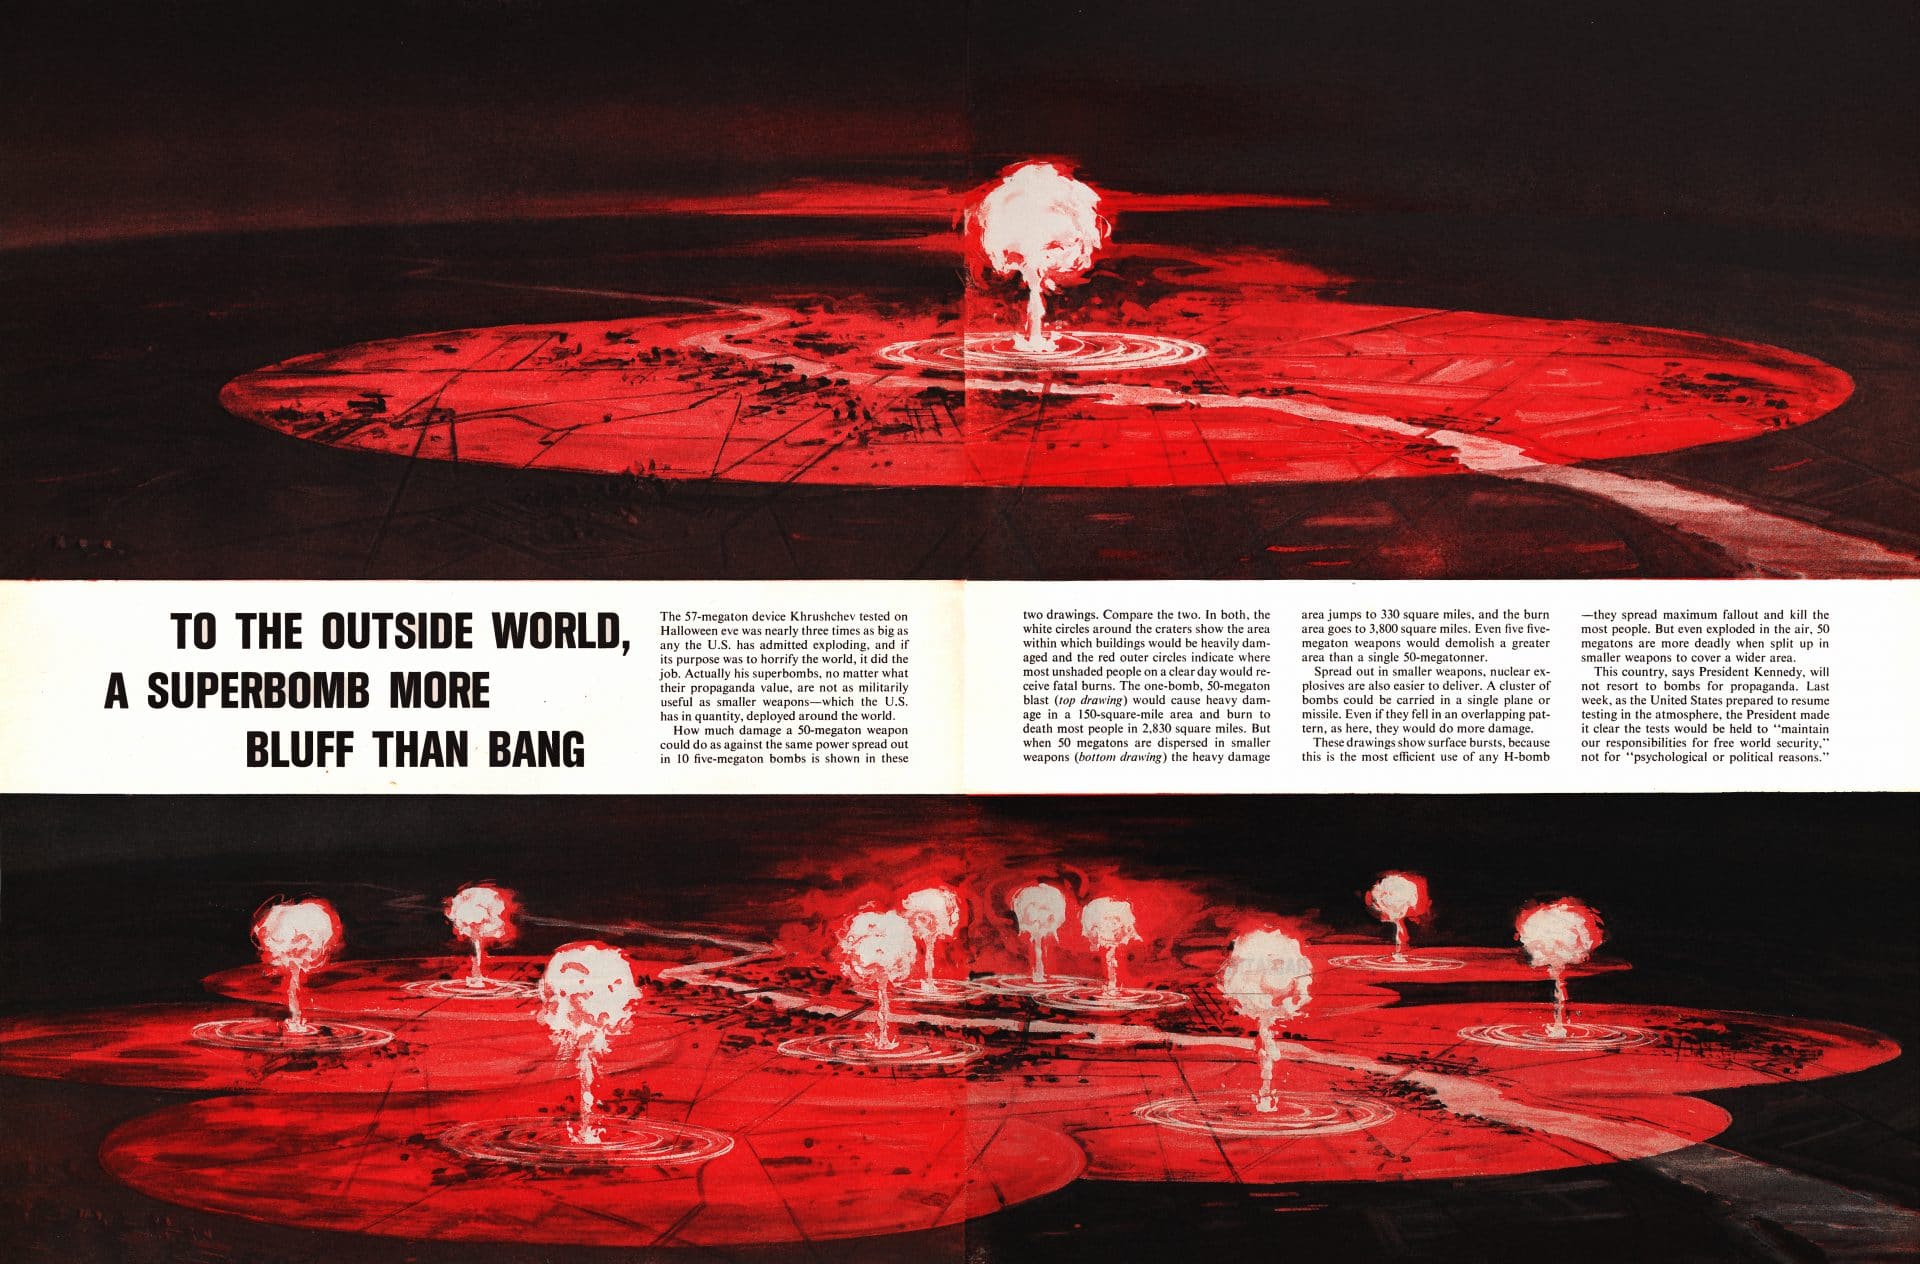 A November 1961 issue of LIFE magazine compared the destructive impact of a  single, high-yield nuclear blast like Tsar Bomba to multiple lower-yield explosions with the same total megatonnage. The caption notes that even below 50 megatons, distributing lower-yield detonations would cause more damage.